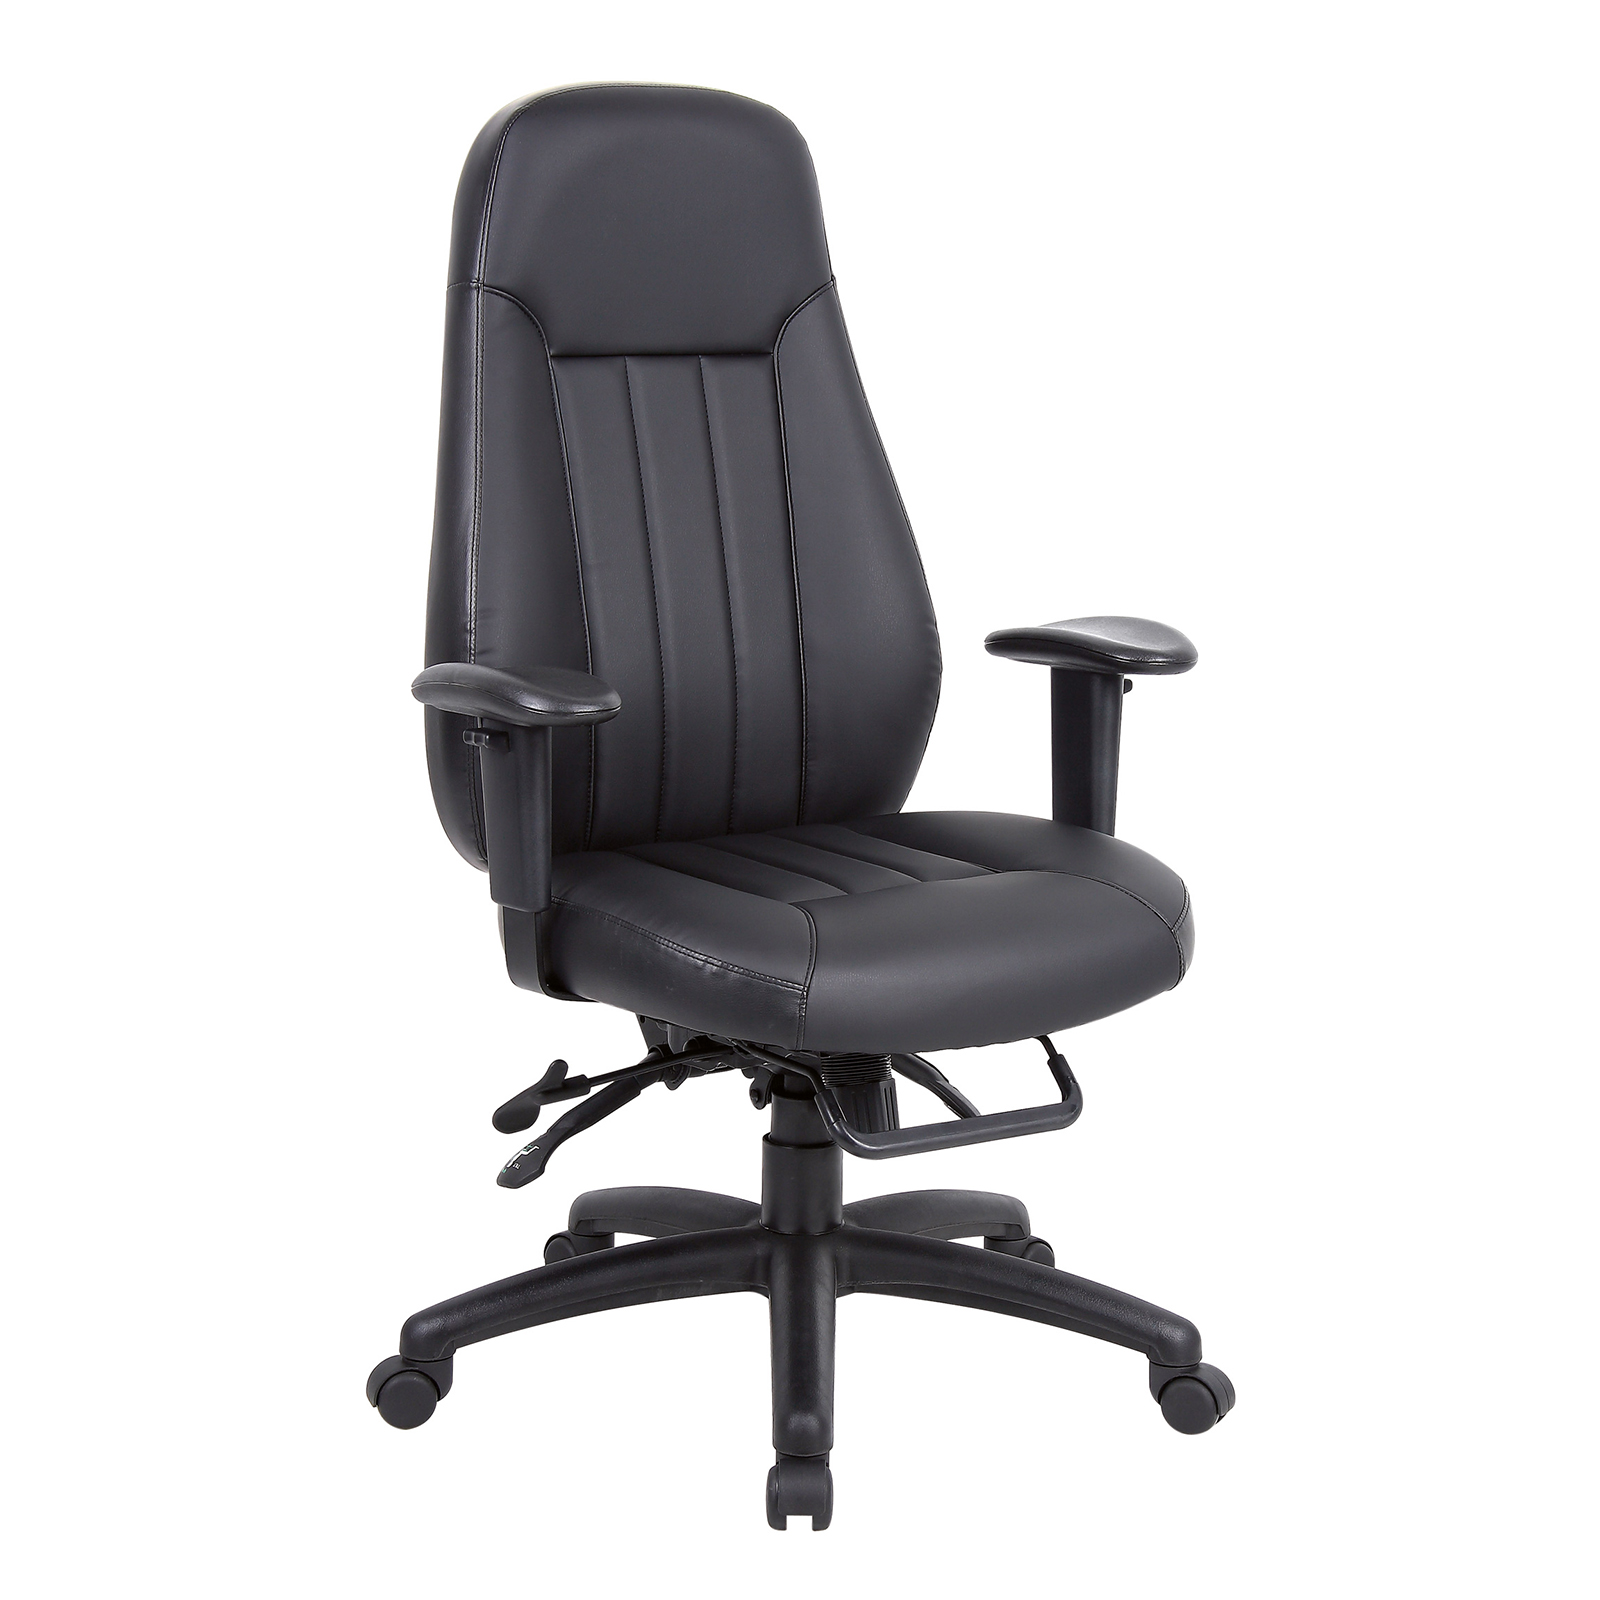 Executive Chairs Zeus high back 24hr task chair - black faux leather